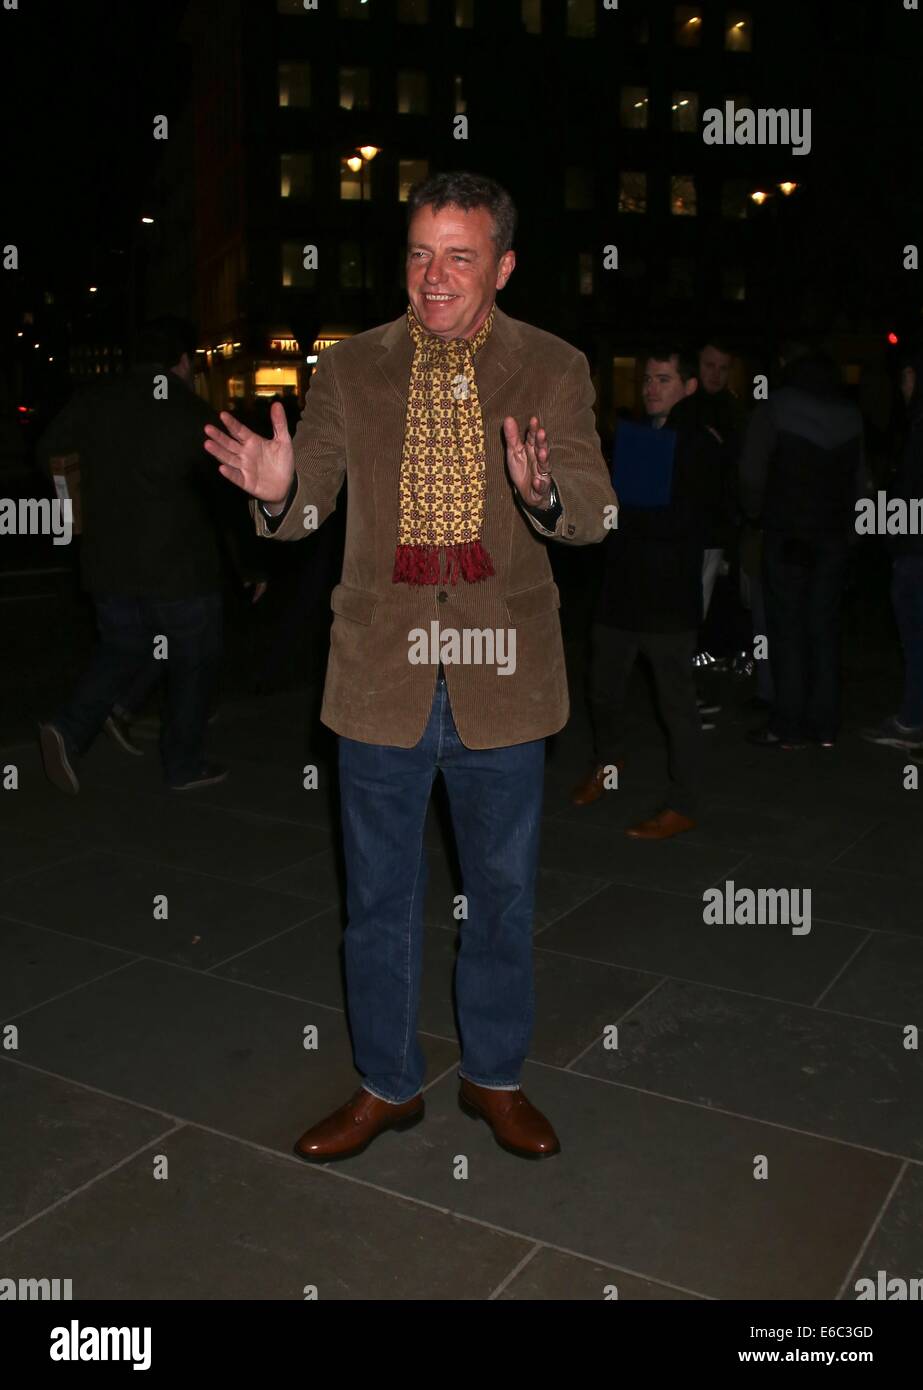 Bailey's Stardust - Exhibition of images by David Bailey supported by Stock  Photo - Alamy